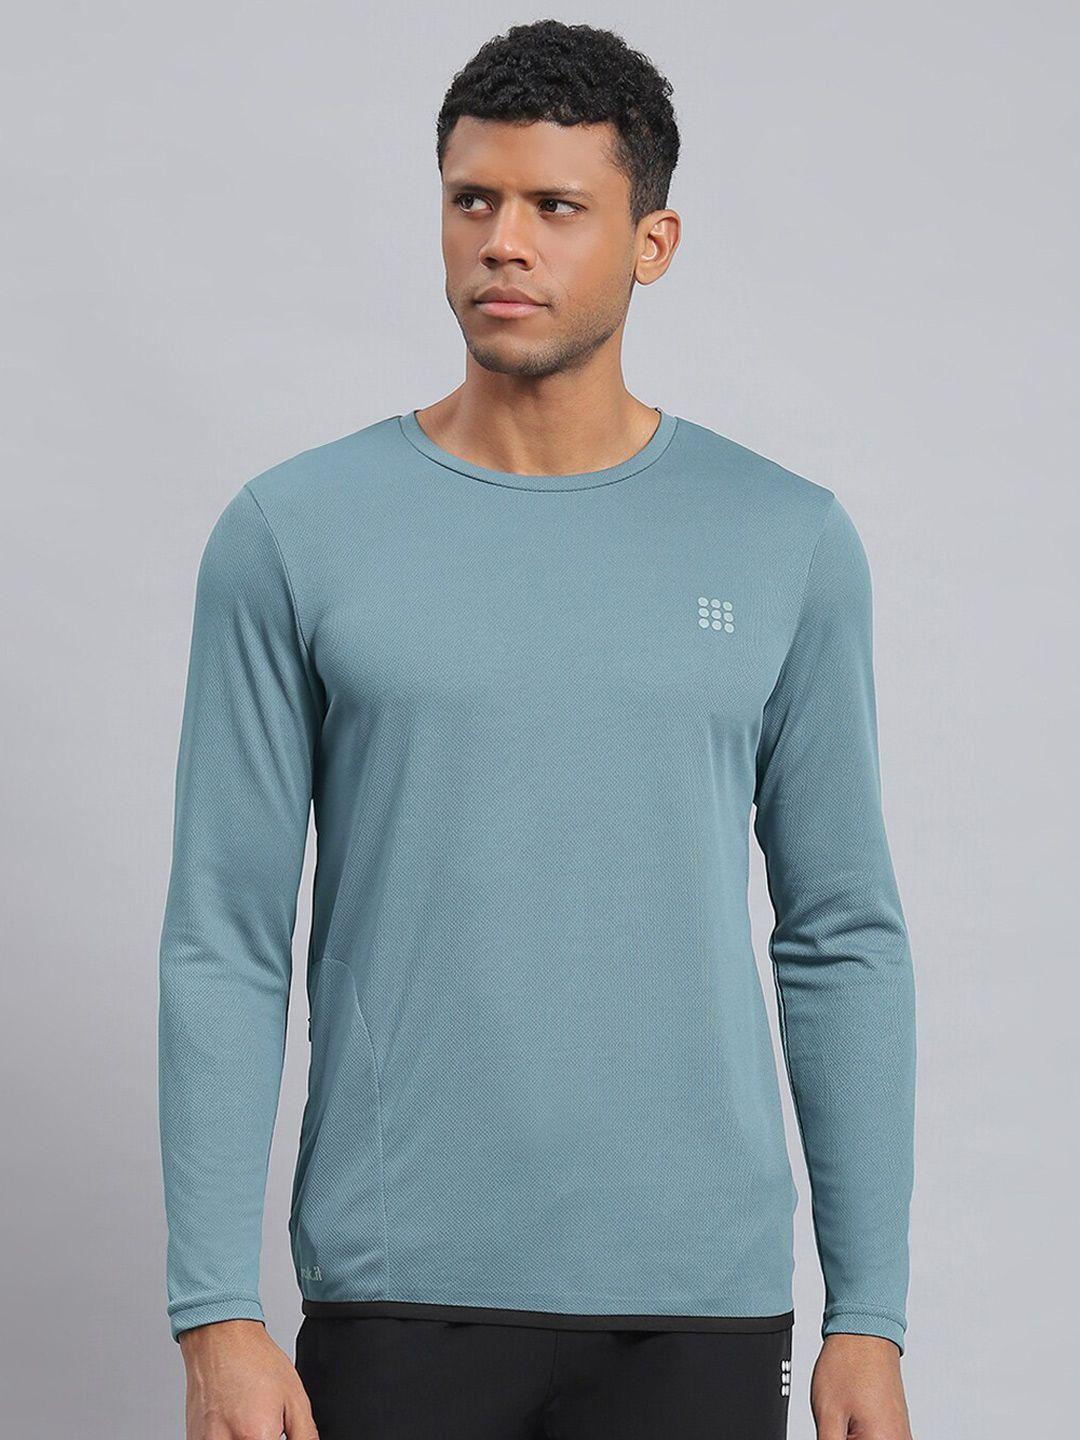 rock.it round neck long sleeves t-shirt